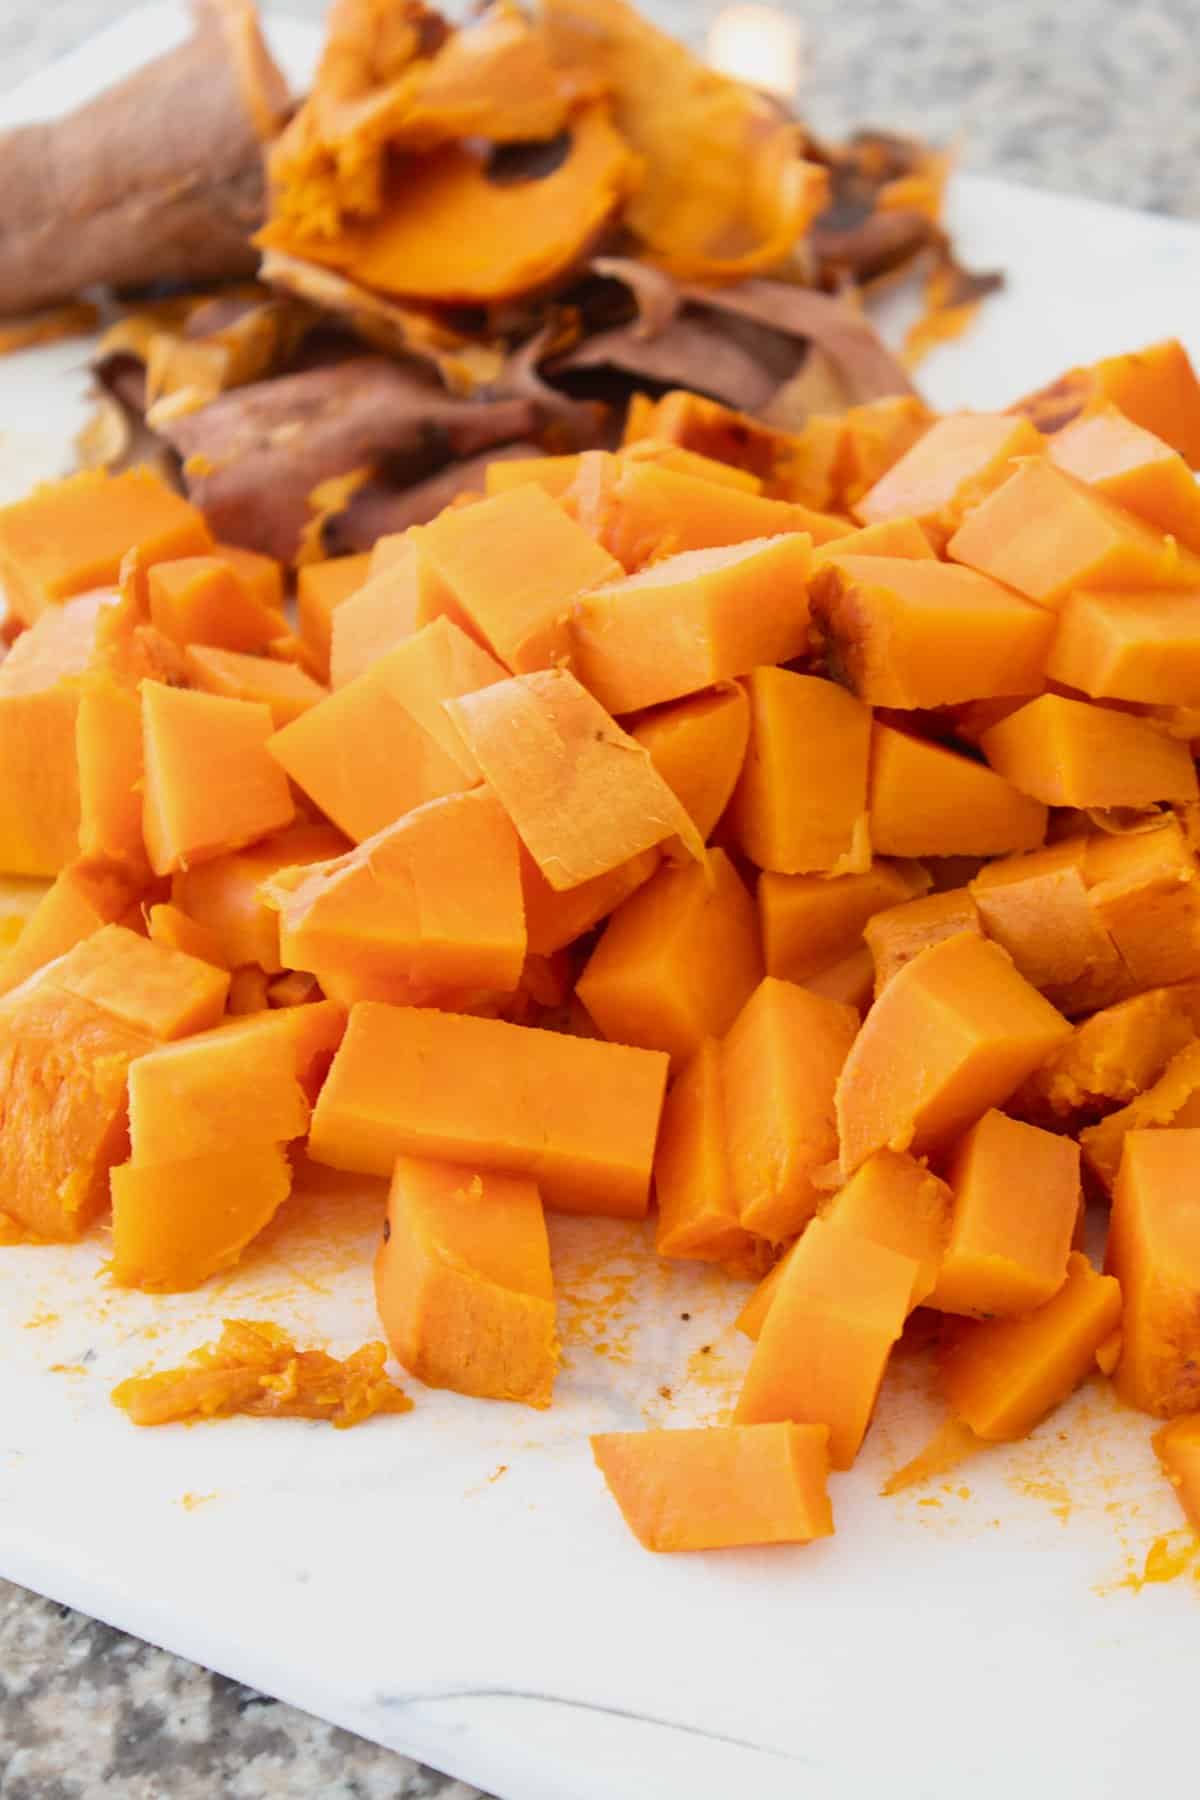 cubed sweet potatoes on a cutting board